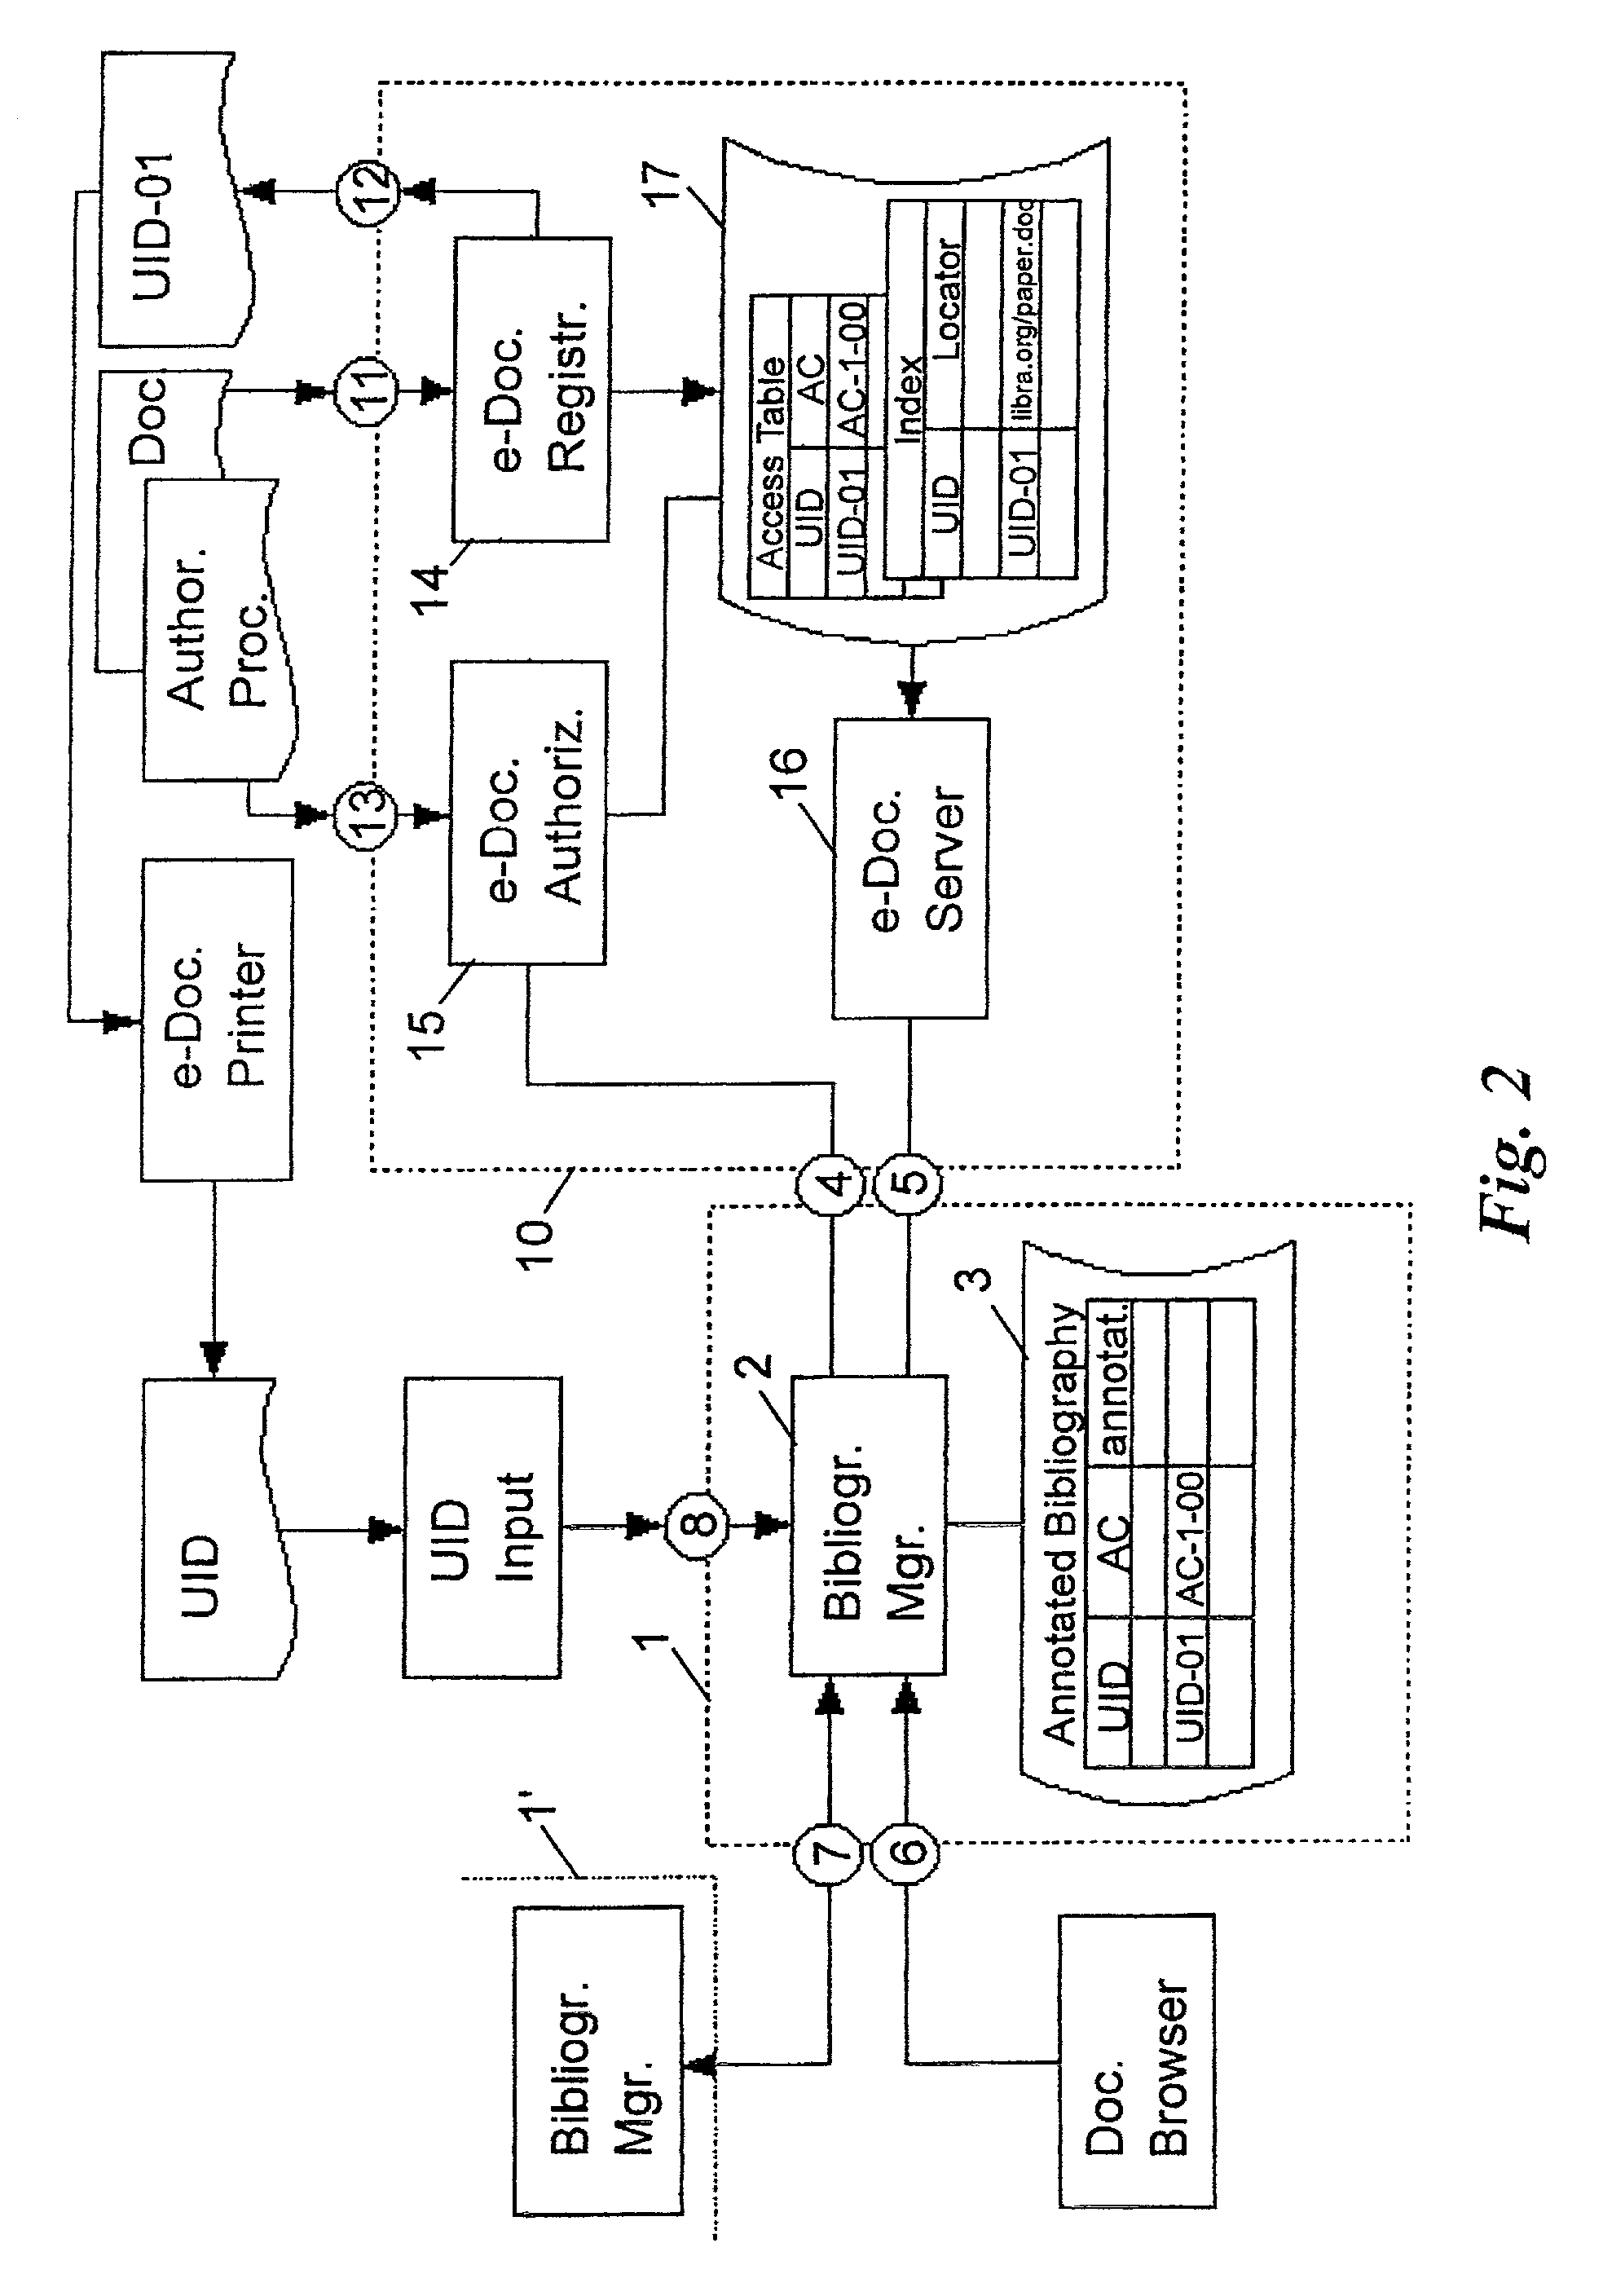 Archiving and retrieval method and apparatus